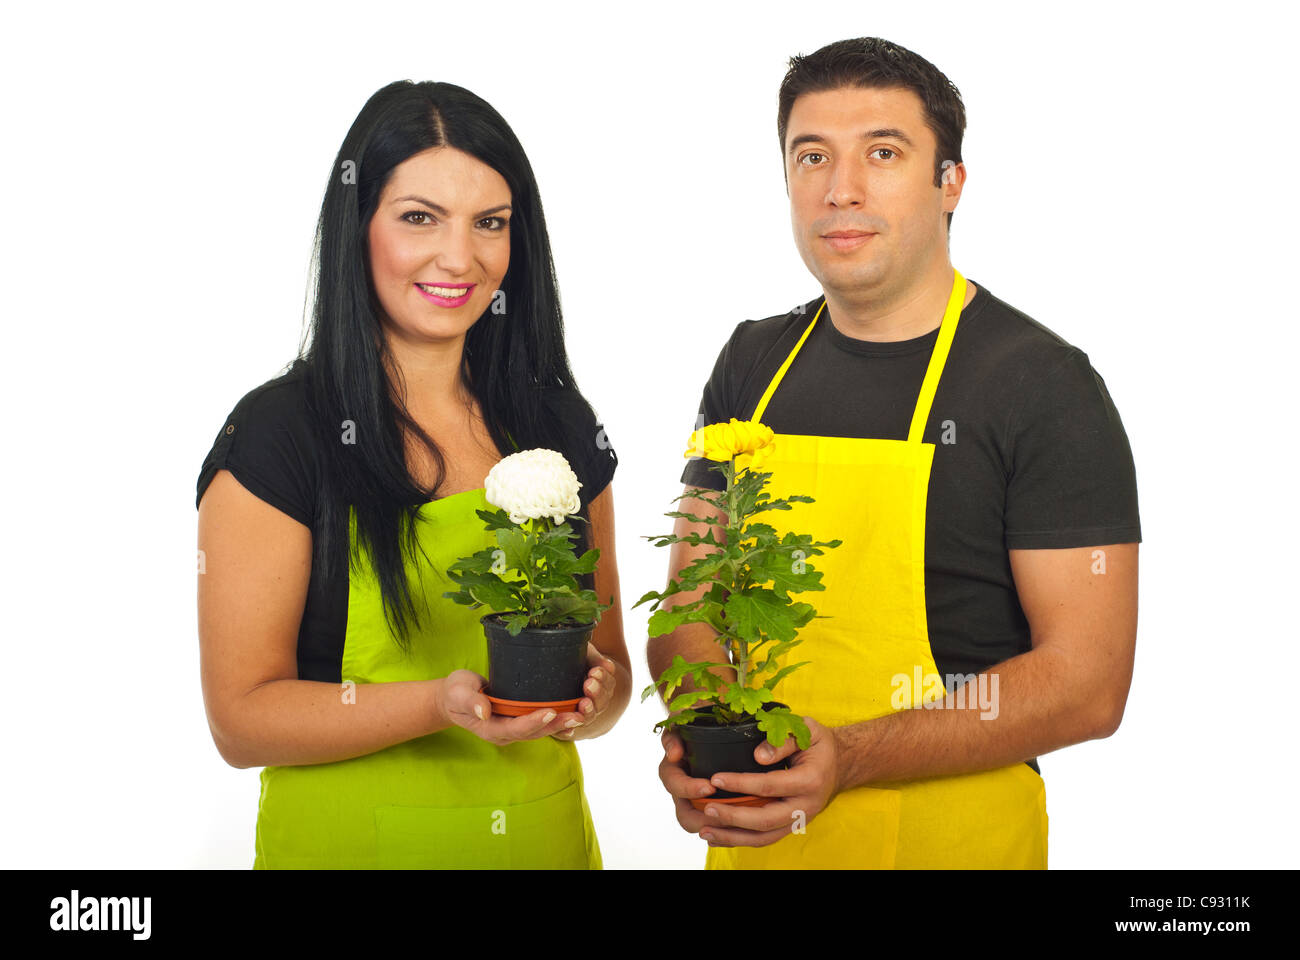 Two florists team holding chrysanthemums isolated on white background Stock Photo